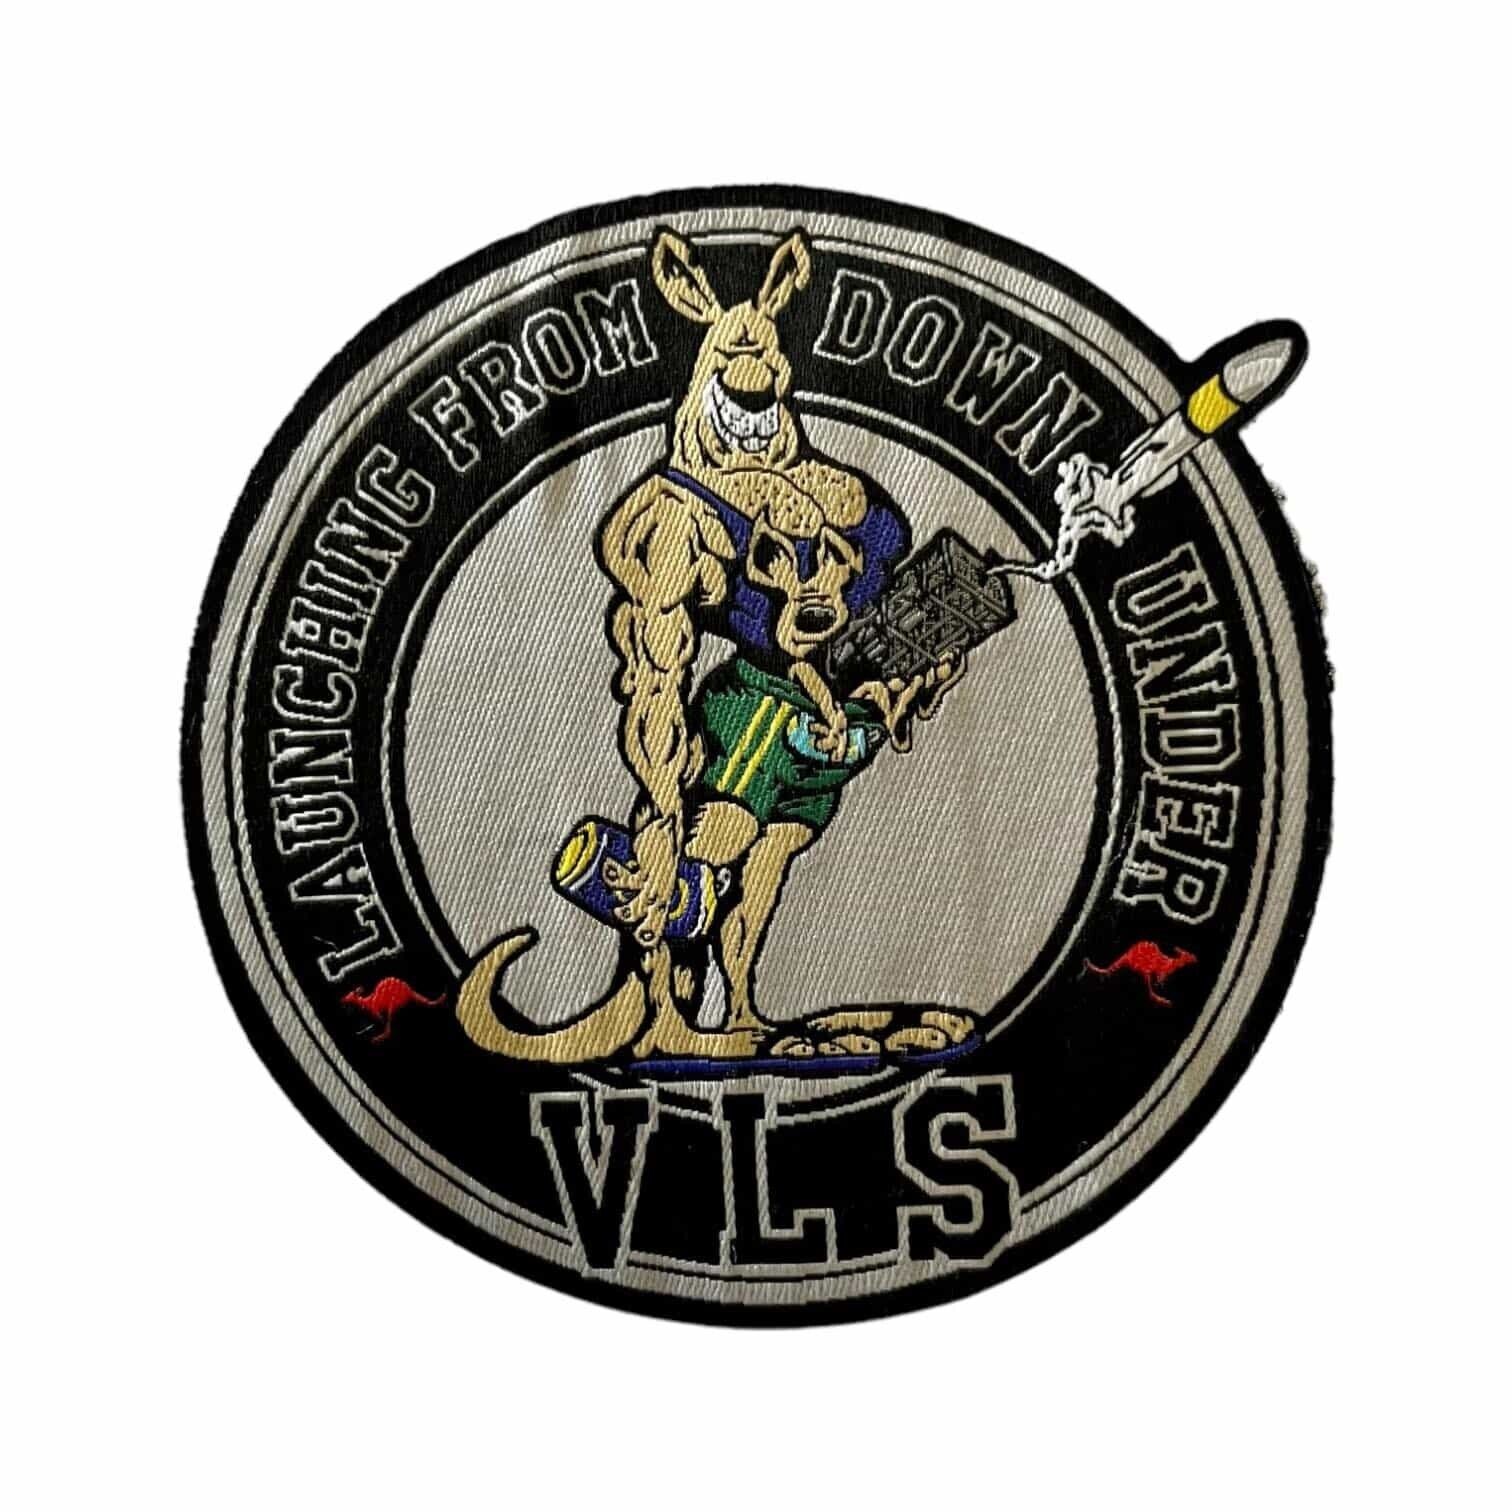 4 x Launching From Down Under VLS Patch - ADF Royal Australian Navy